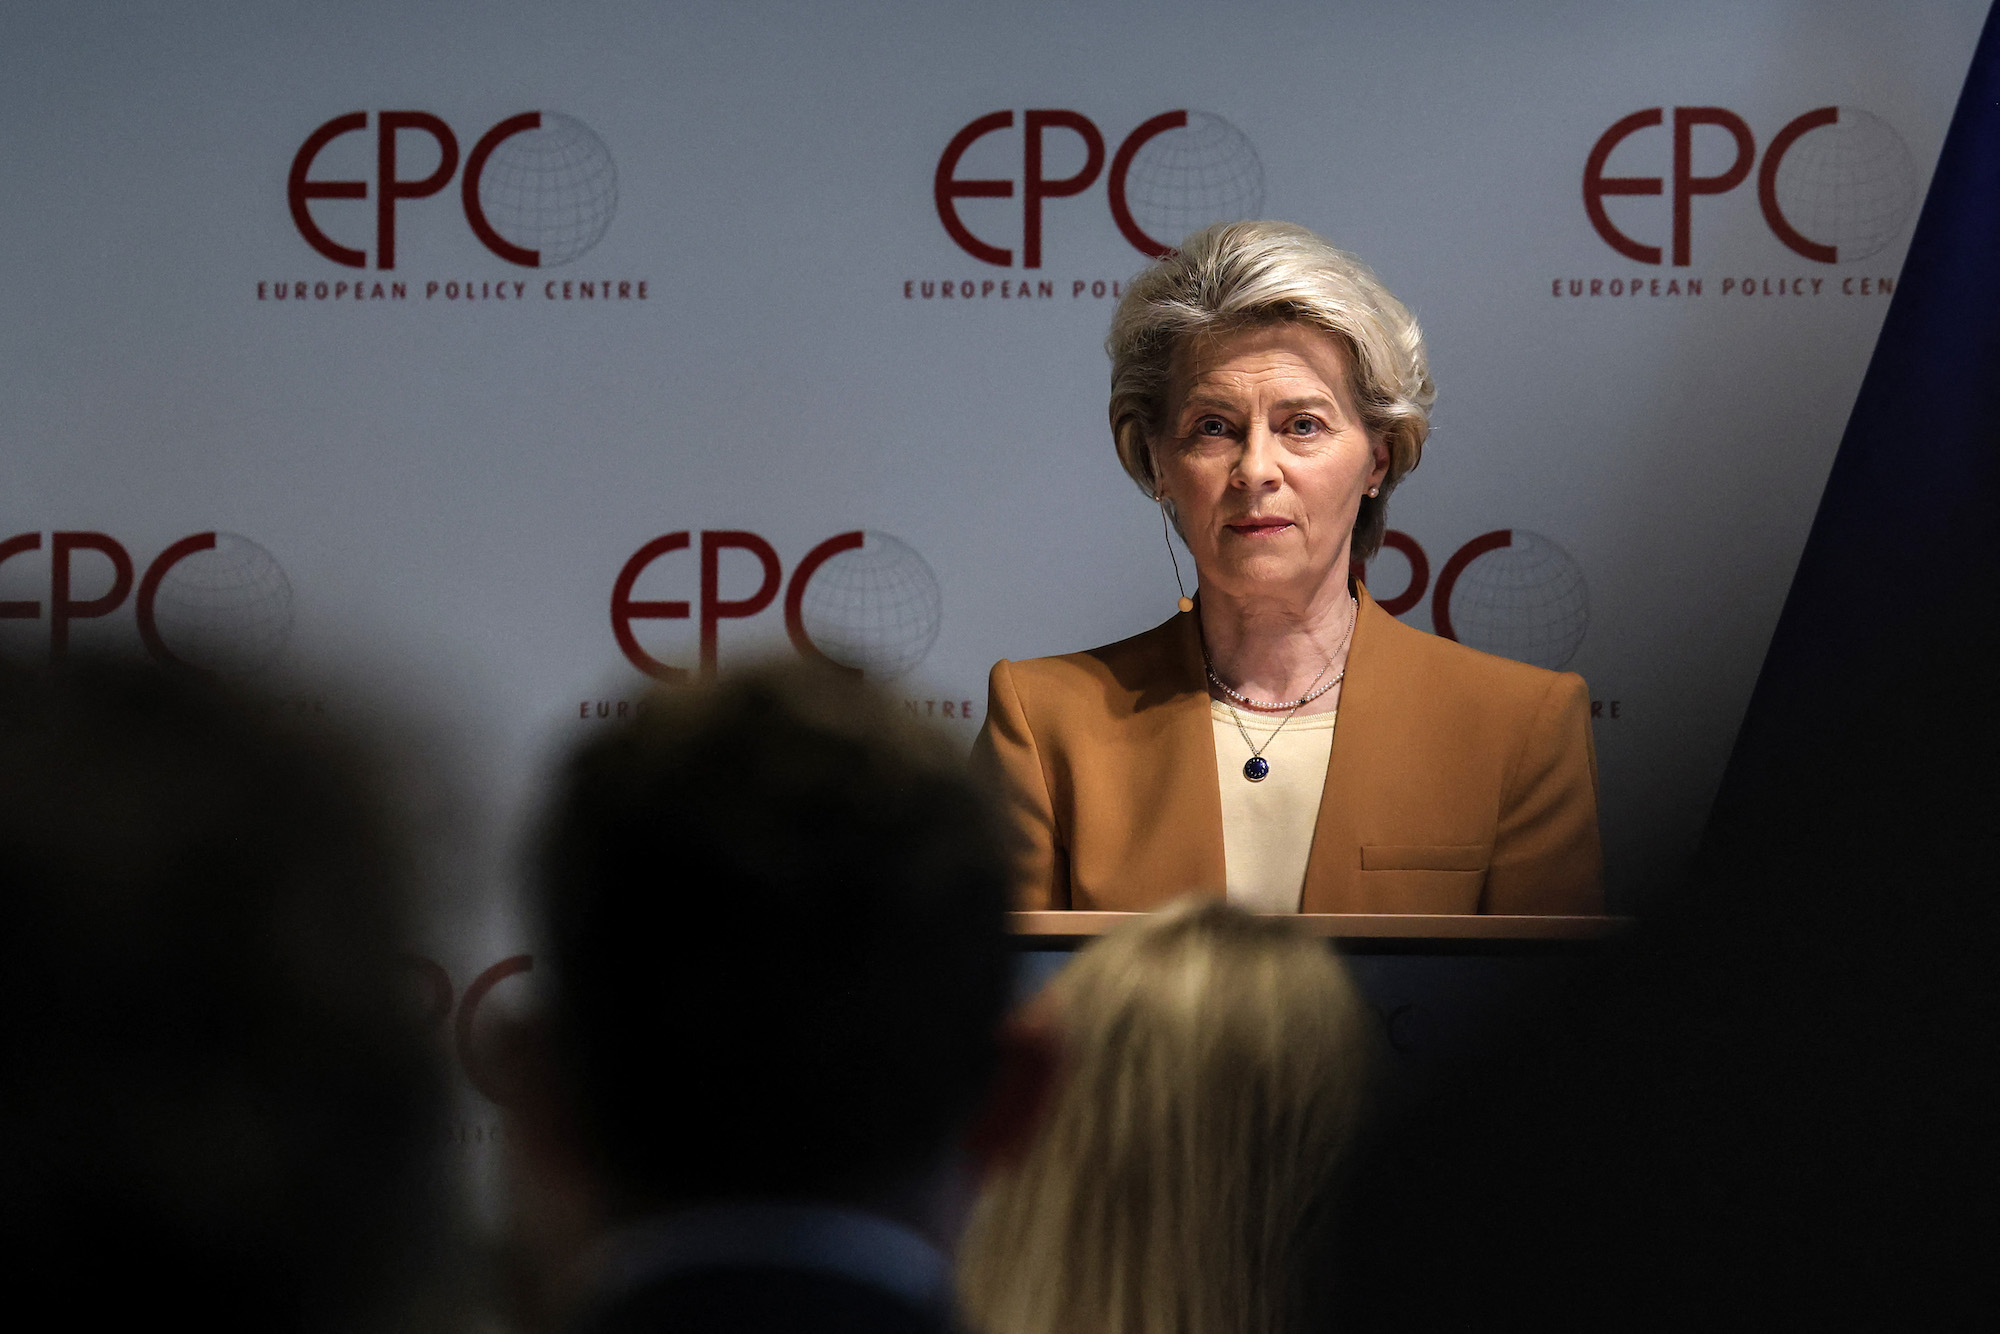 President of the European Commission Ursula von der Leyen delivers an address in Brussels on March 30.